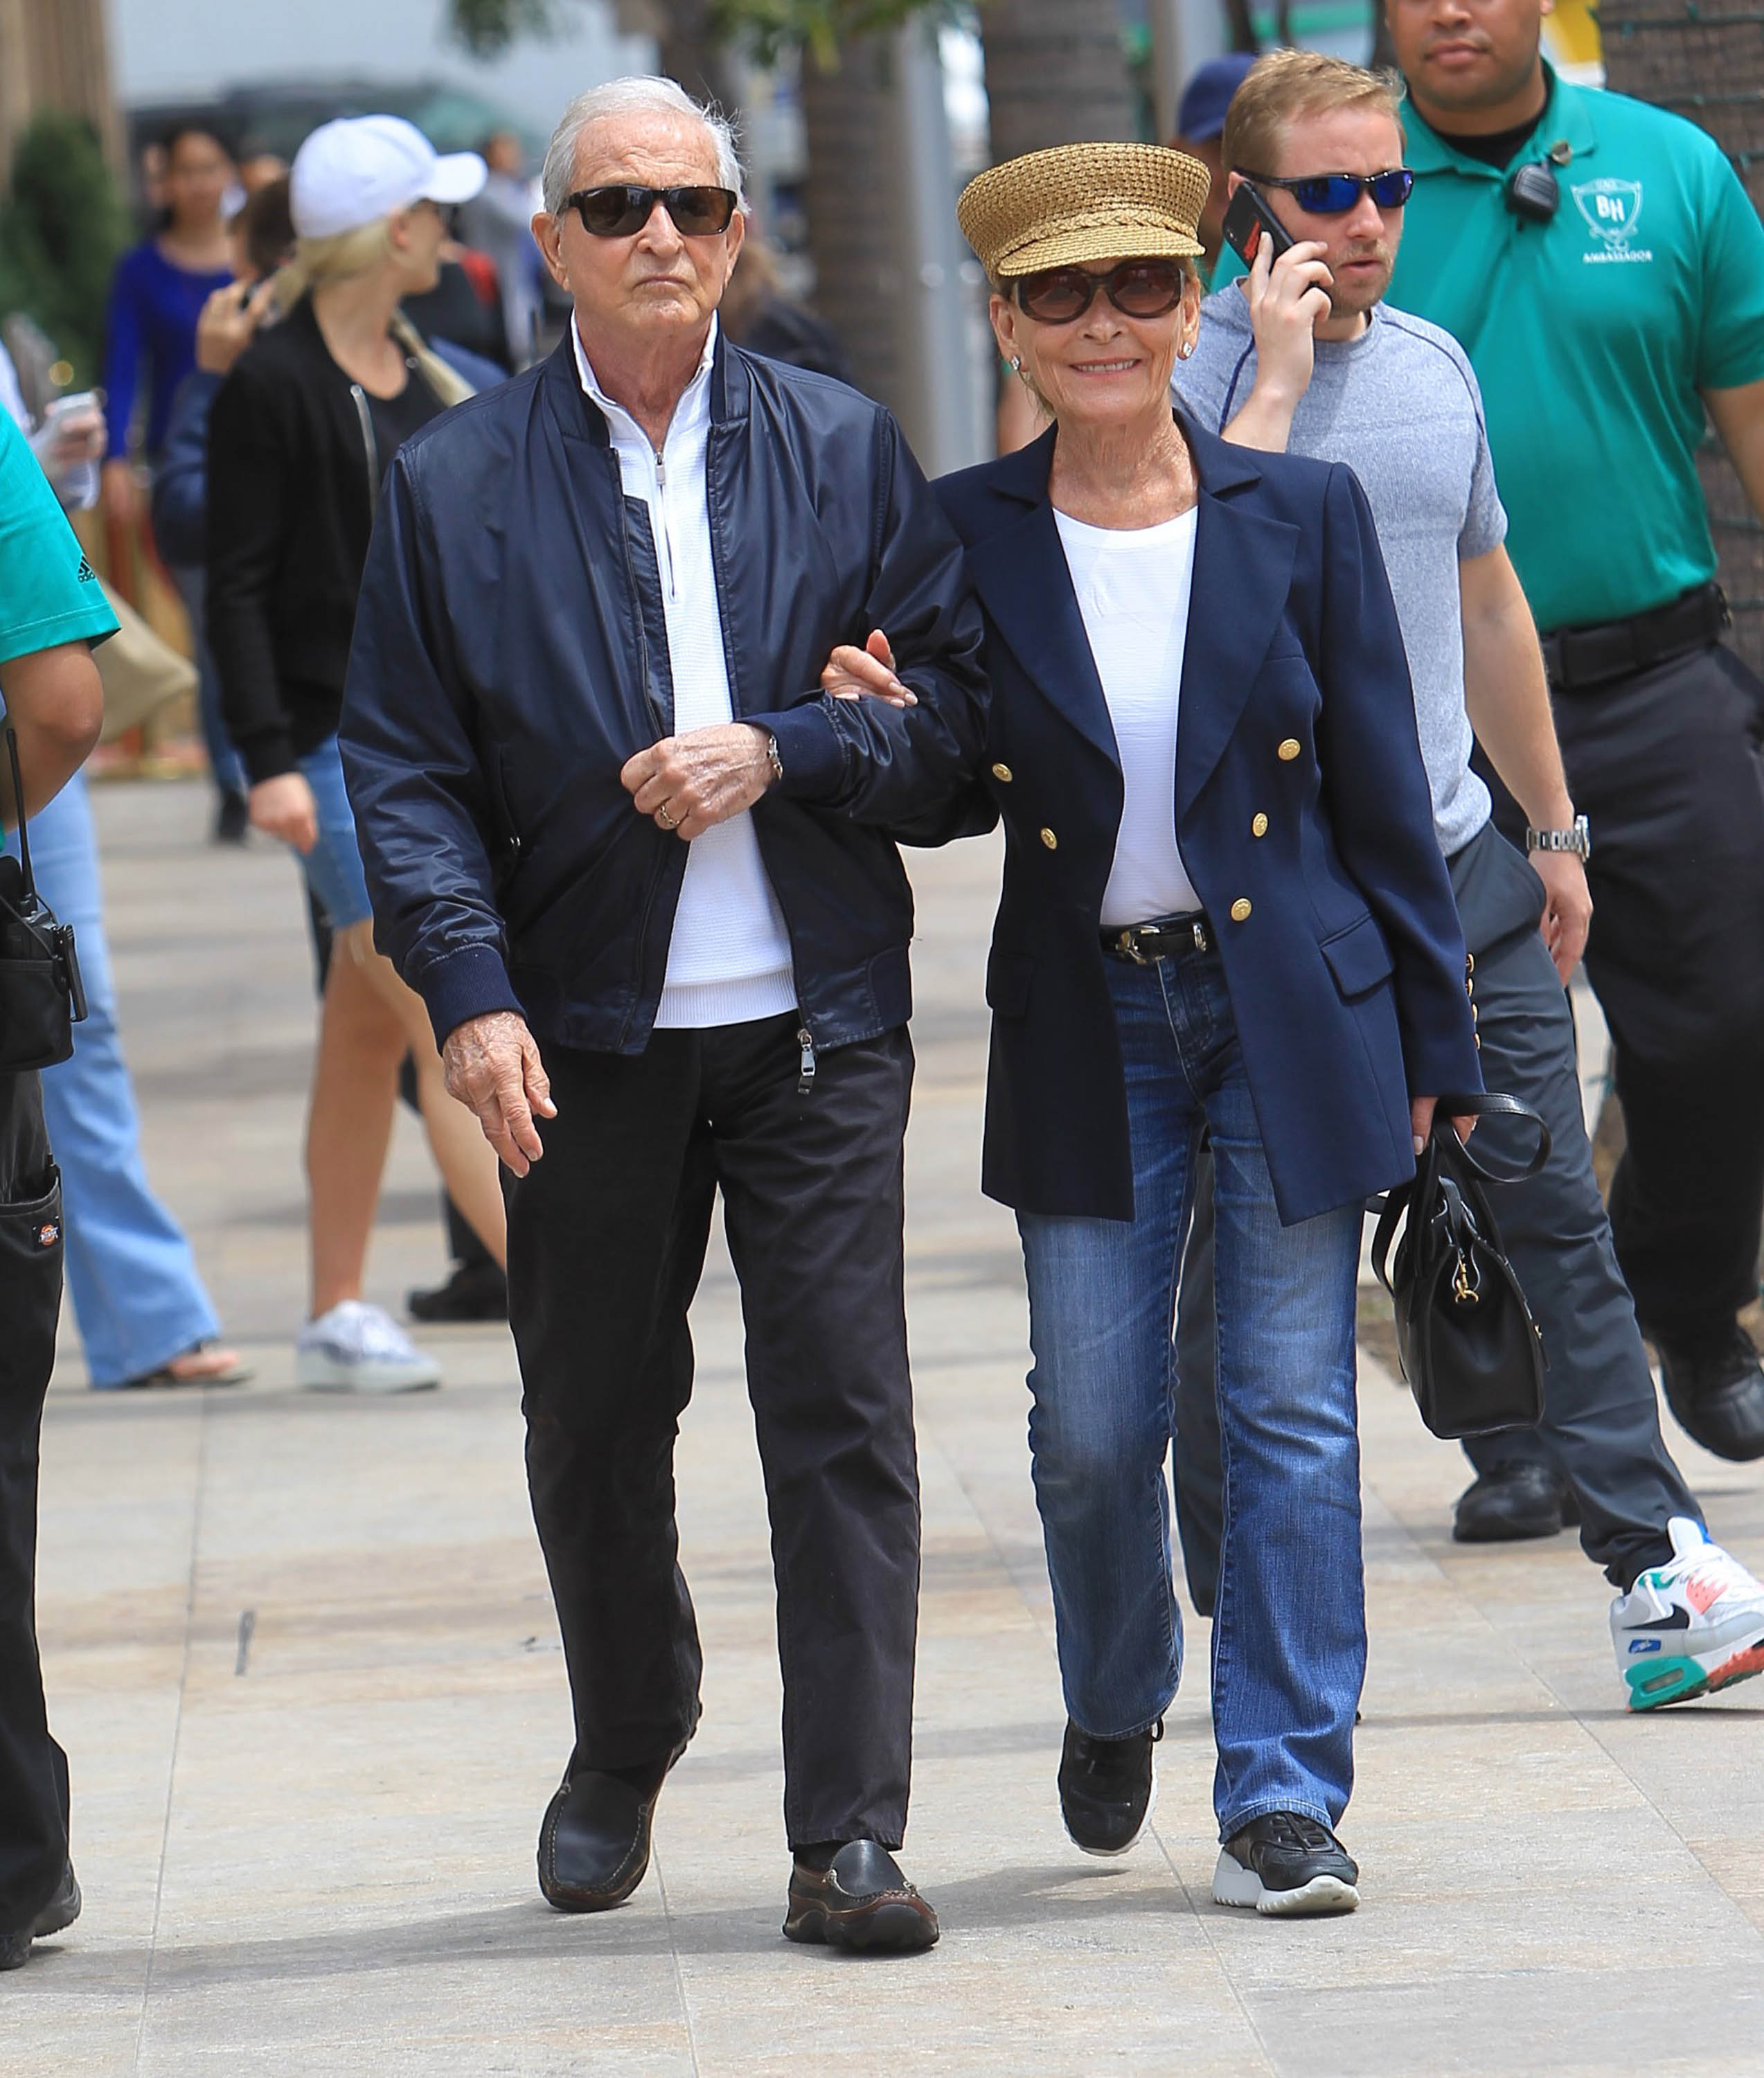 Judy Sheindlin and Jerry Sheindlin spotted in Los Angeles, California on May 2, 2019 | Source: Getty Images